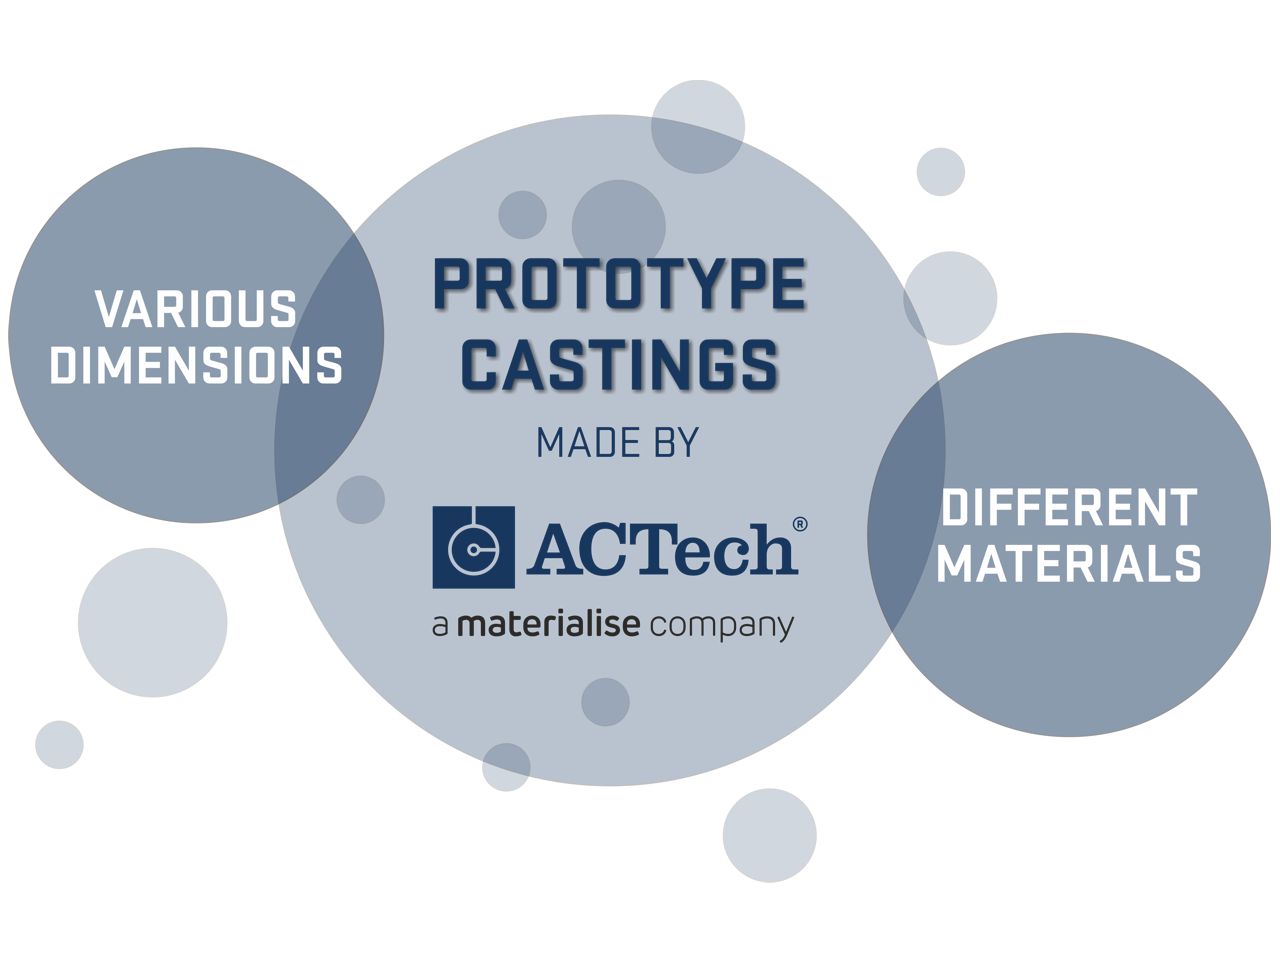 A schematic representation in the form of blue bubbles showing that various dimensions and different materials are possible in prototype casting at ACTech.